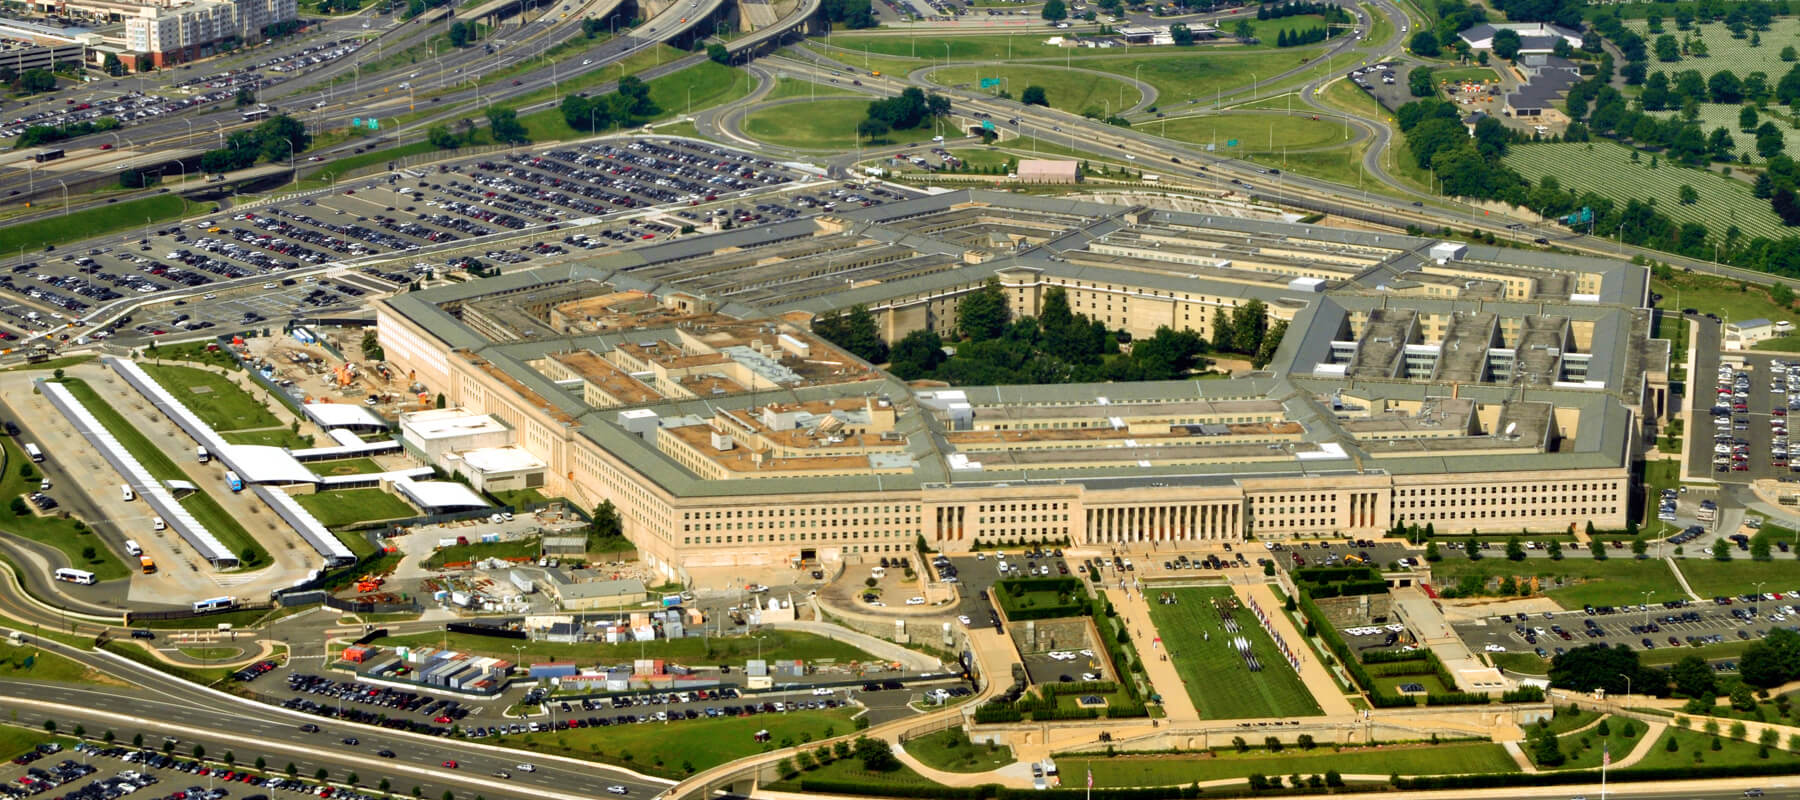 tours of the pentagon